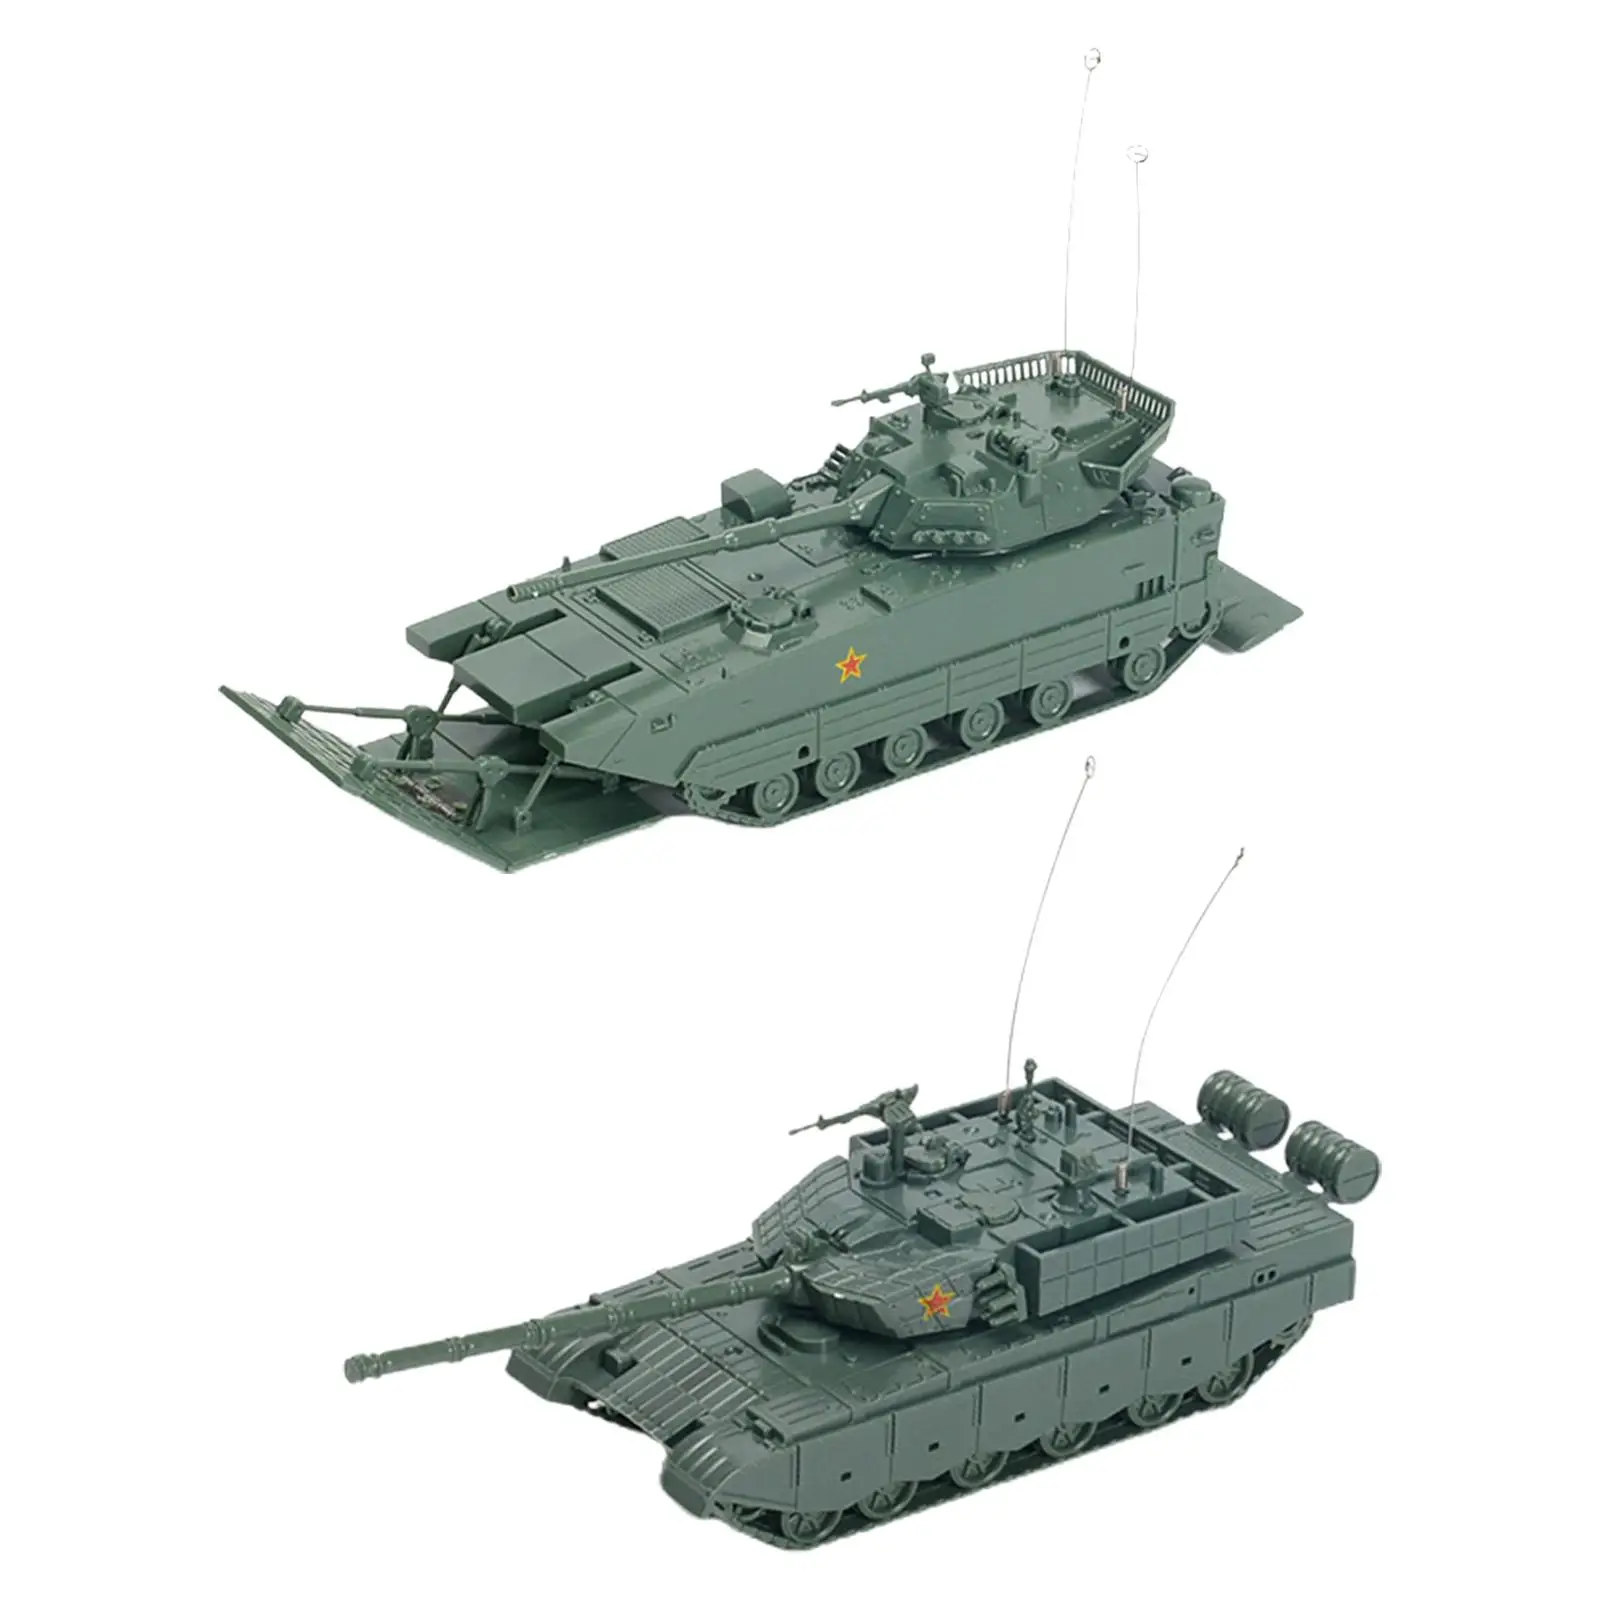 1:72 Scale DIY Assemble Education Toy Miniature Puzzles Armored Tank Model for Boys Party Favors Collectibles Adults Gift